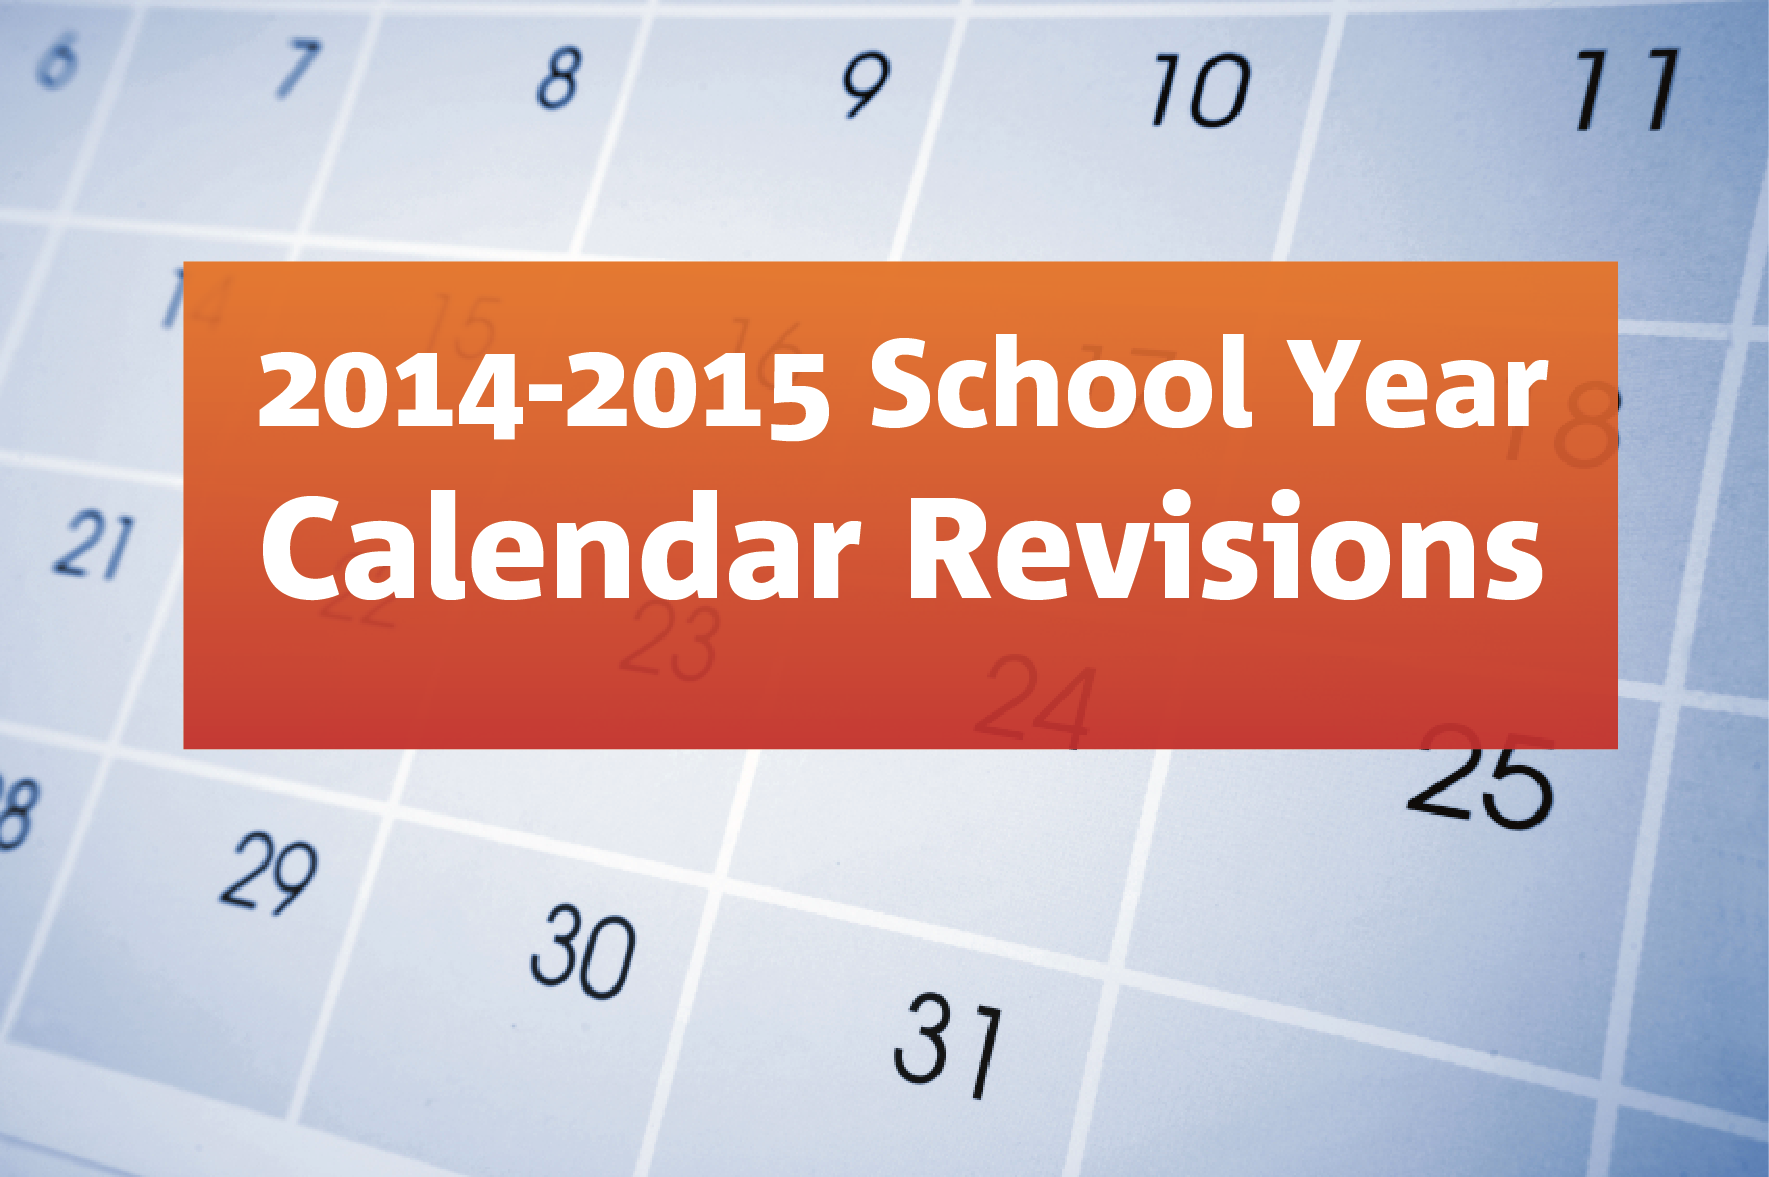 Changes to the 20142015 school year calendar